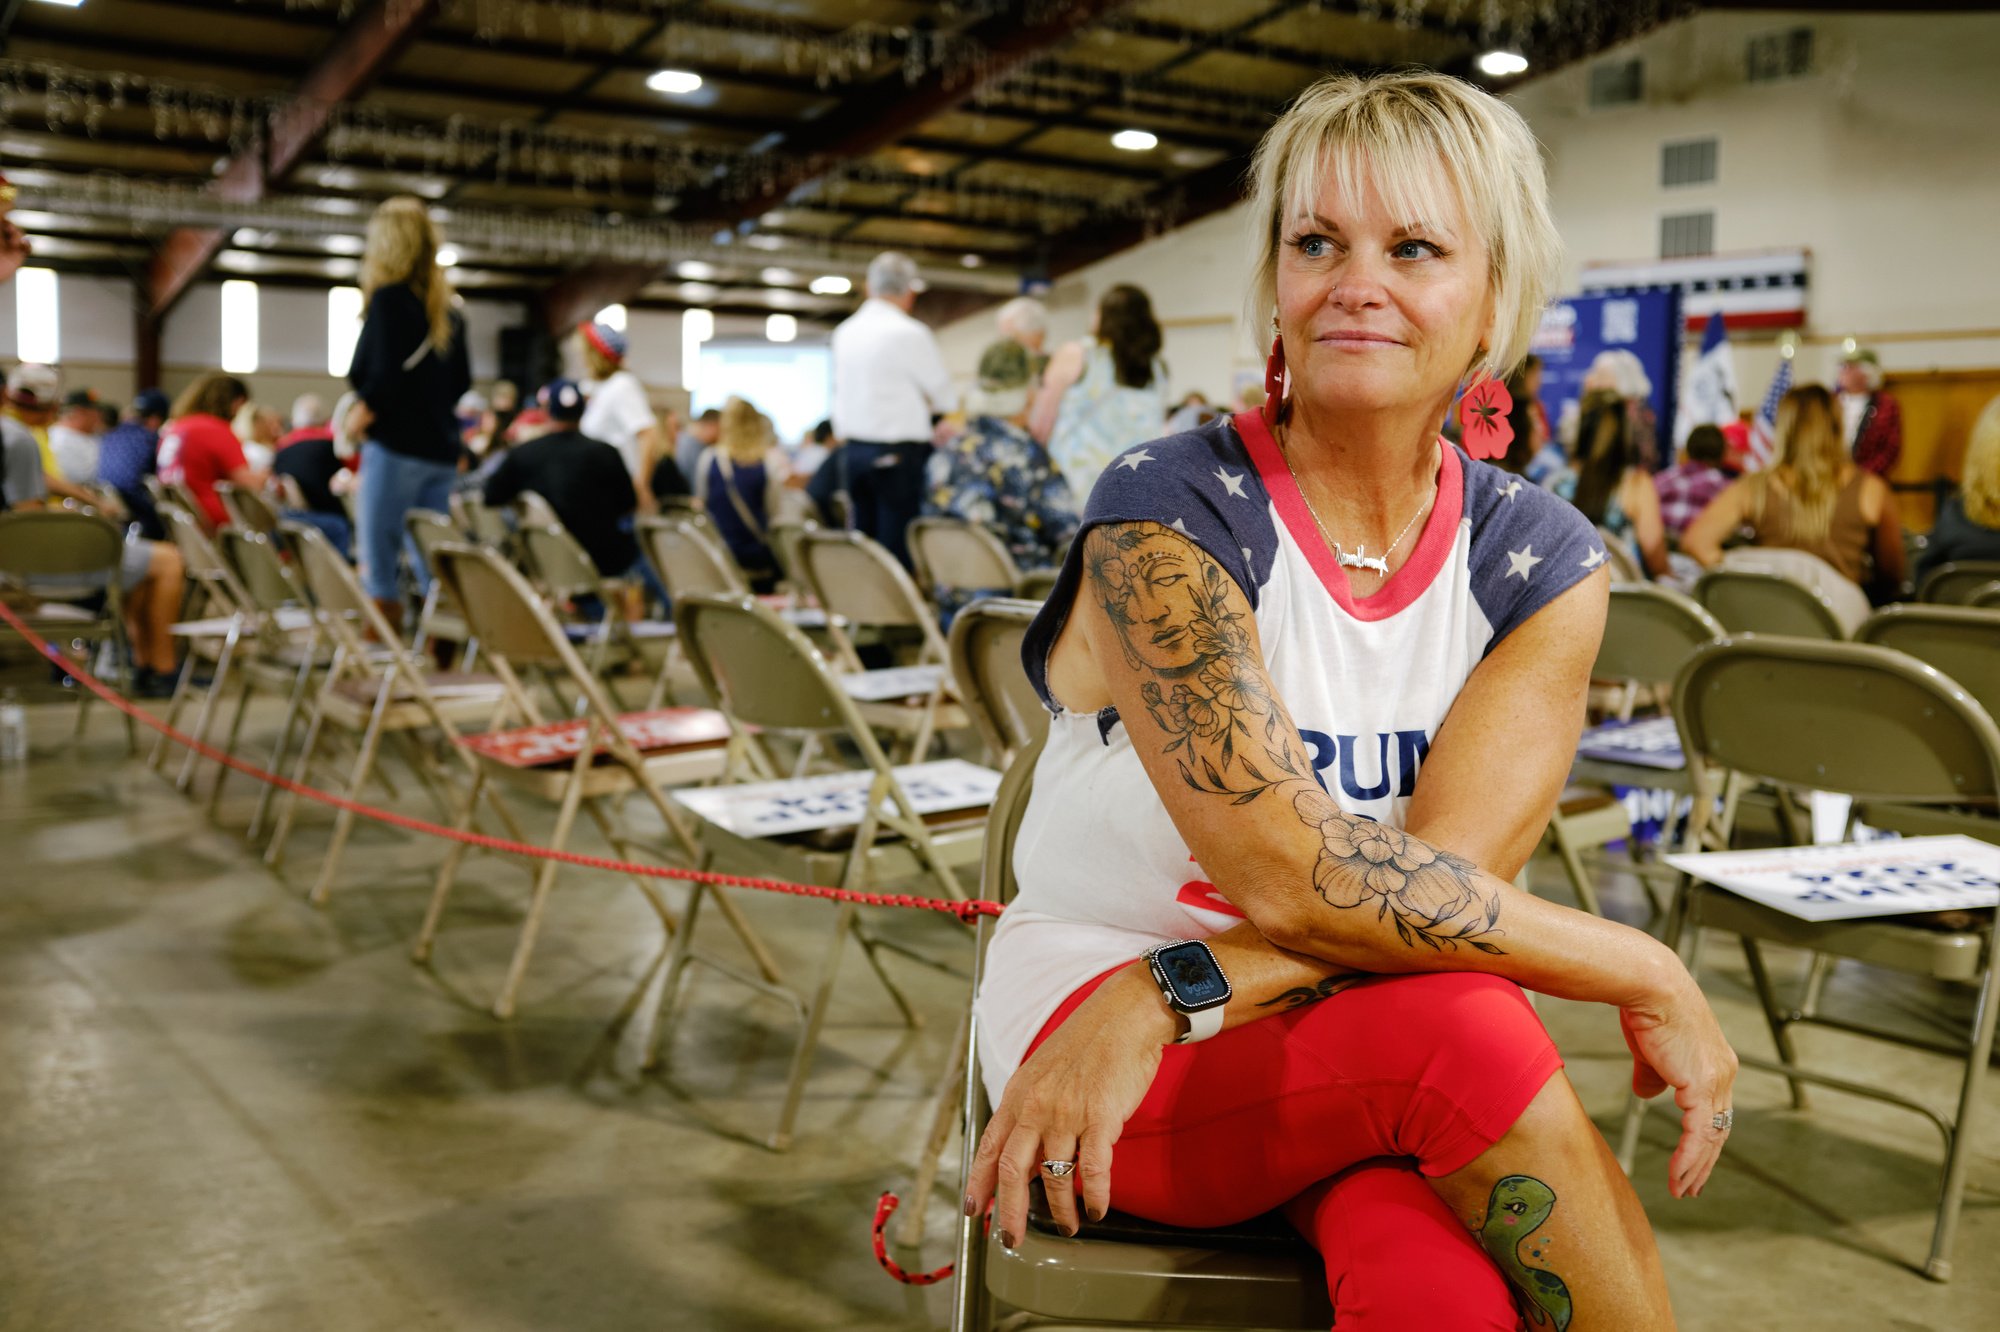  Becky Hauser of Dubuque, Iowa at the Team Trump Iowa Commit to Caucus Event at the Jackson County Fairgrounds in Maquoketa, IA on Sept. 20, 2023. (Mustafa Hussain for the New York Times) 